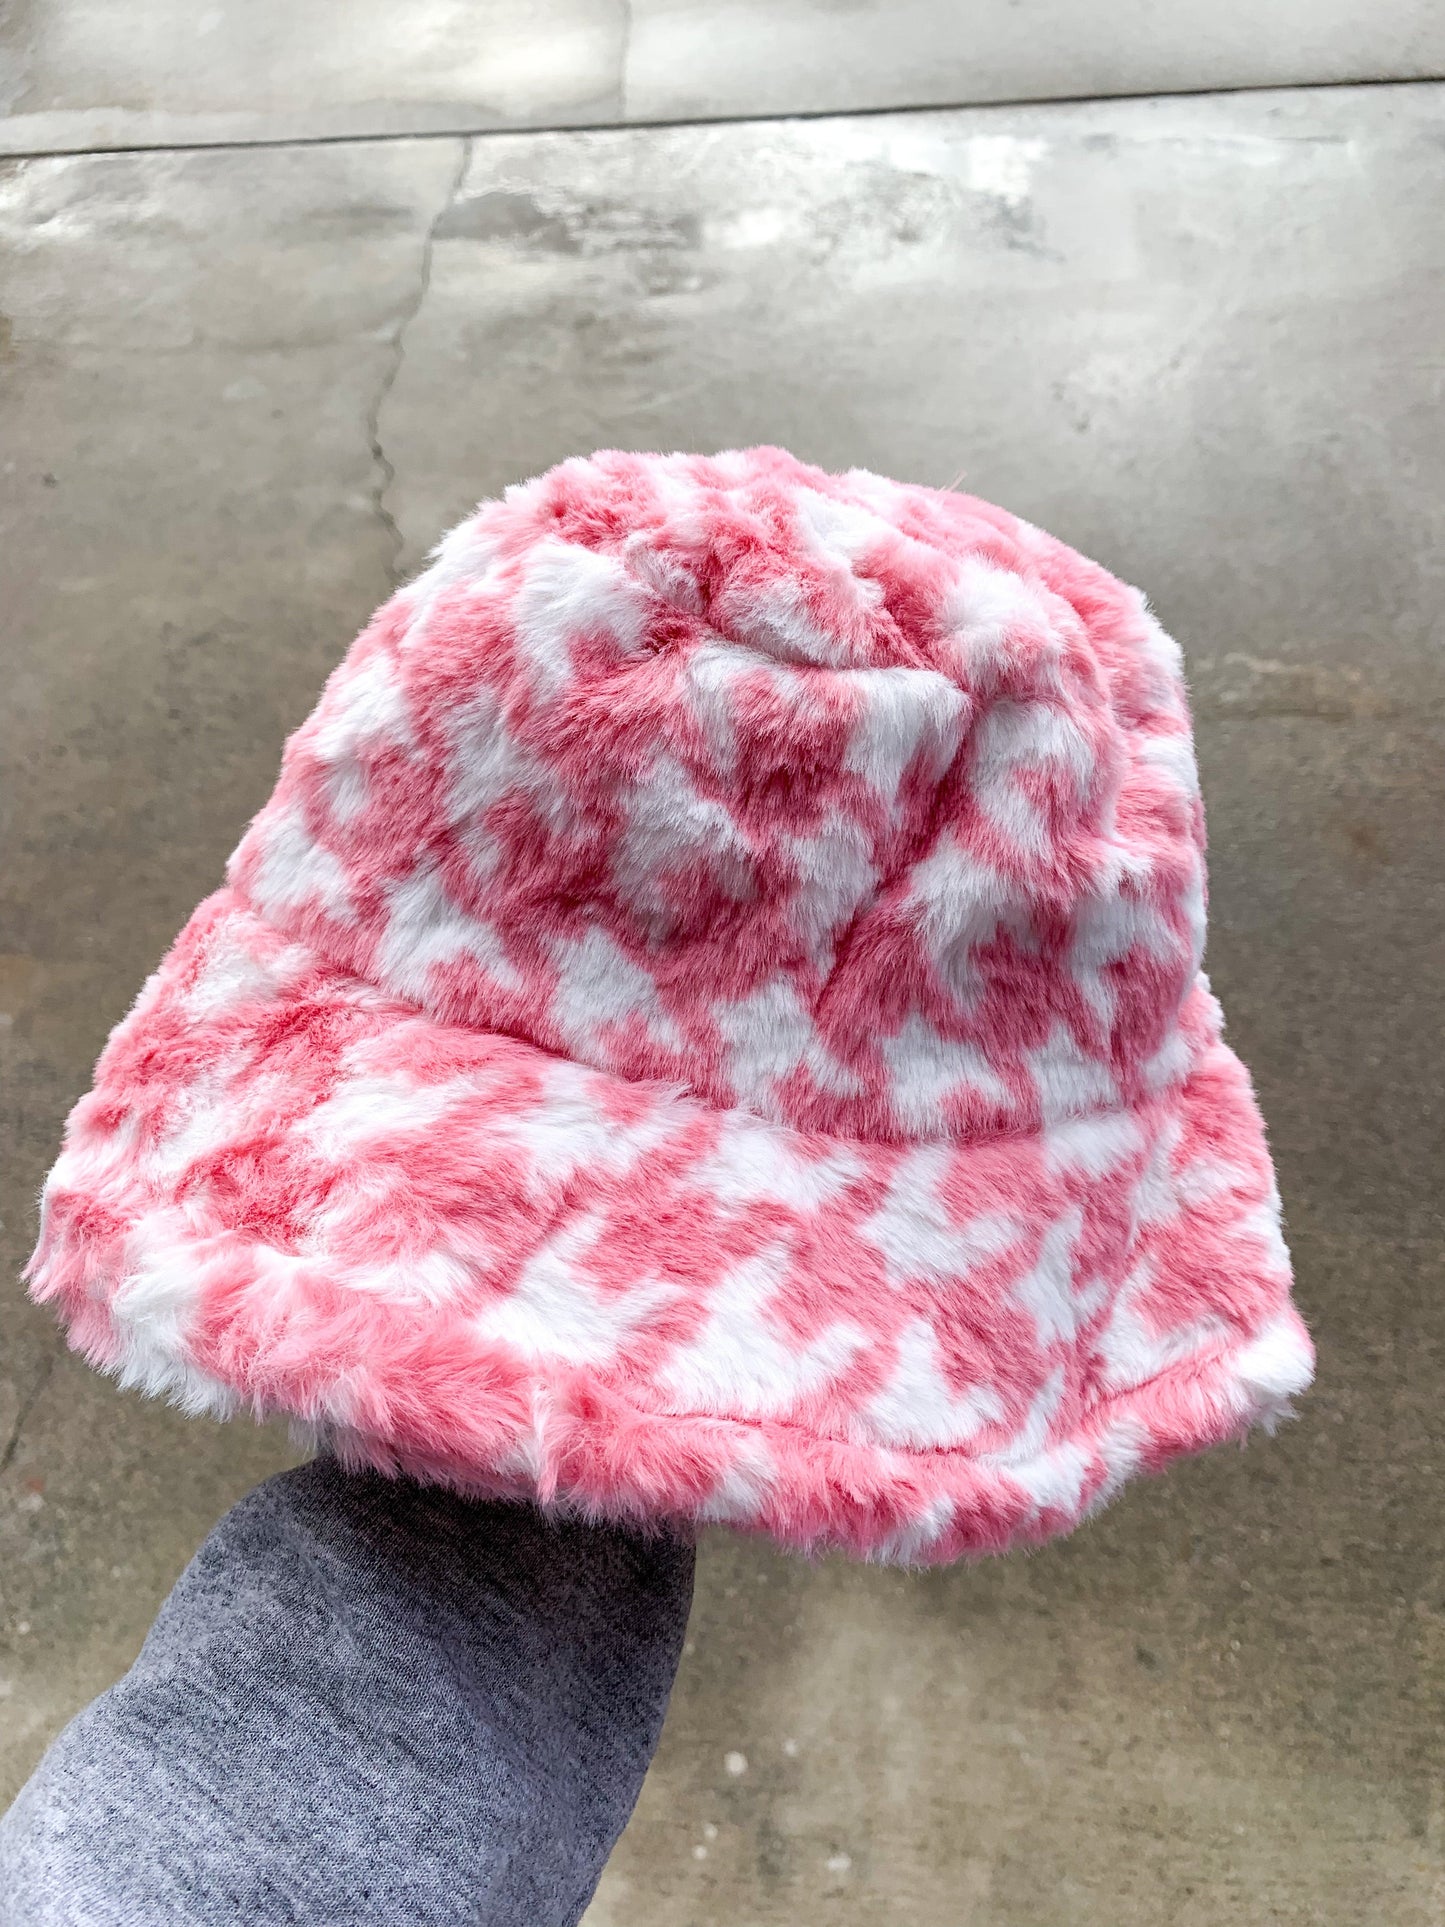 Fluffy Pink and White Patterned Print Bucket Hat